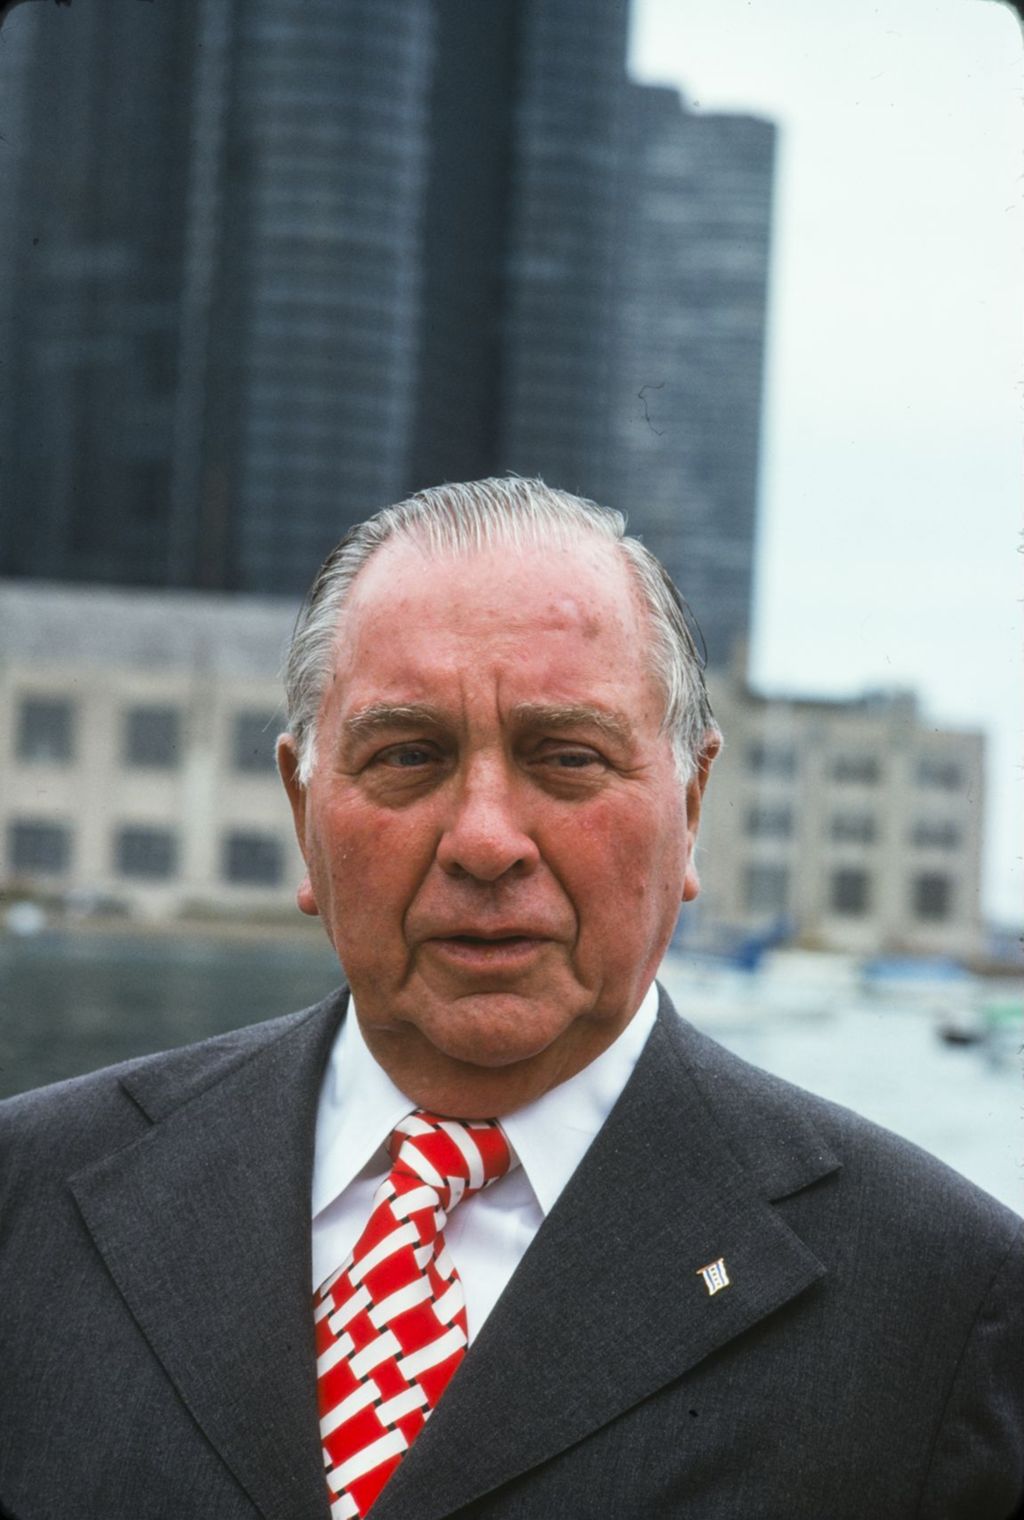 Portraits of Richard J. Daley with buildings behind him